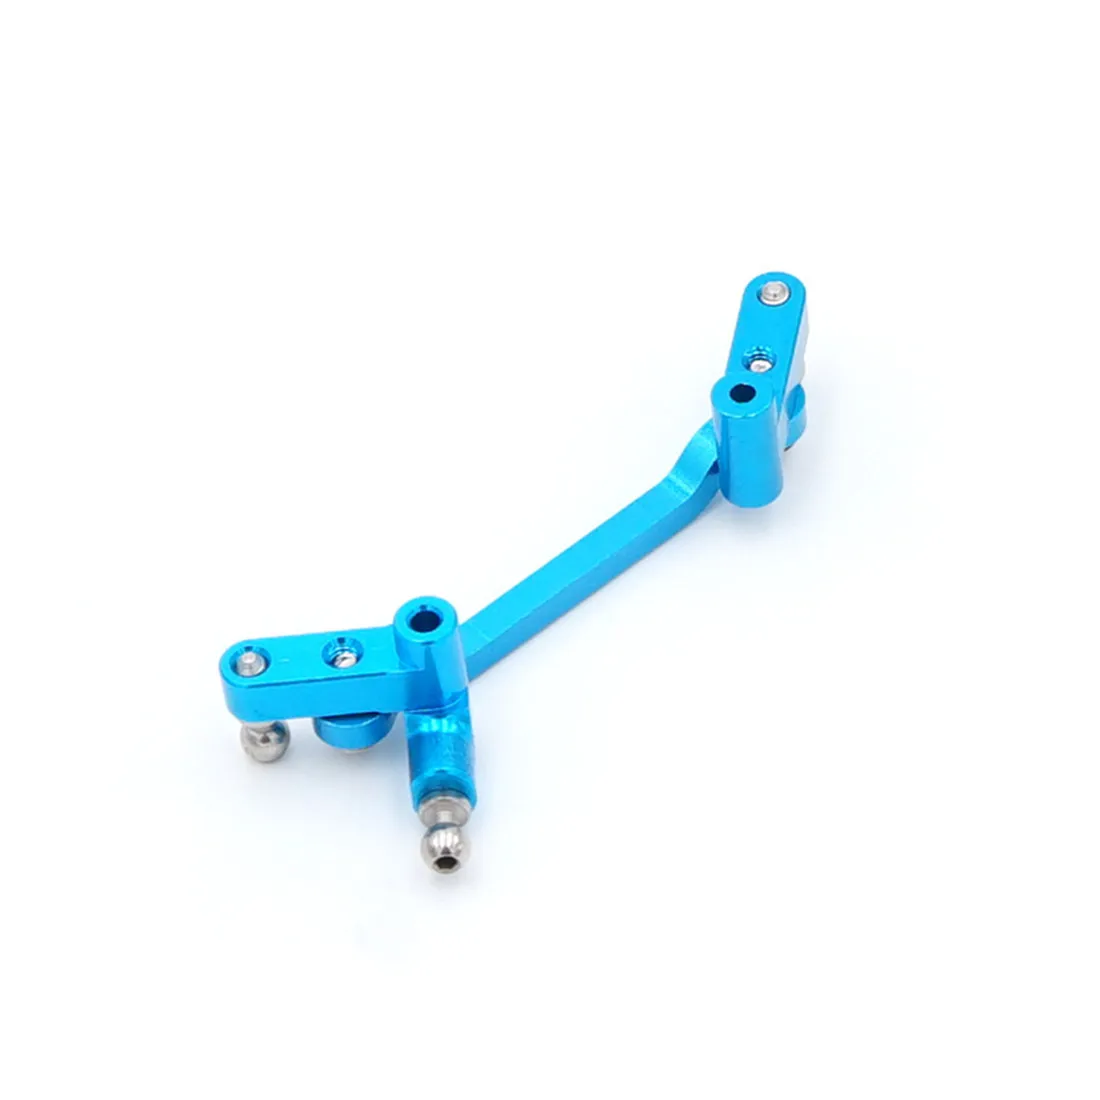 

High Quality Upgrade Aluminum Steering Linkage Metal RC Car Steering Linkage Turning Seat For WLtoys A949 A959-B A969 A979 K929